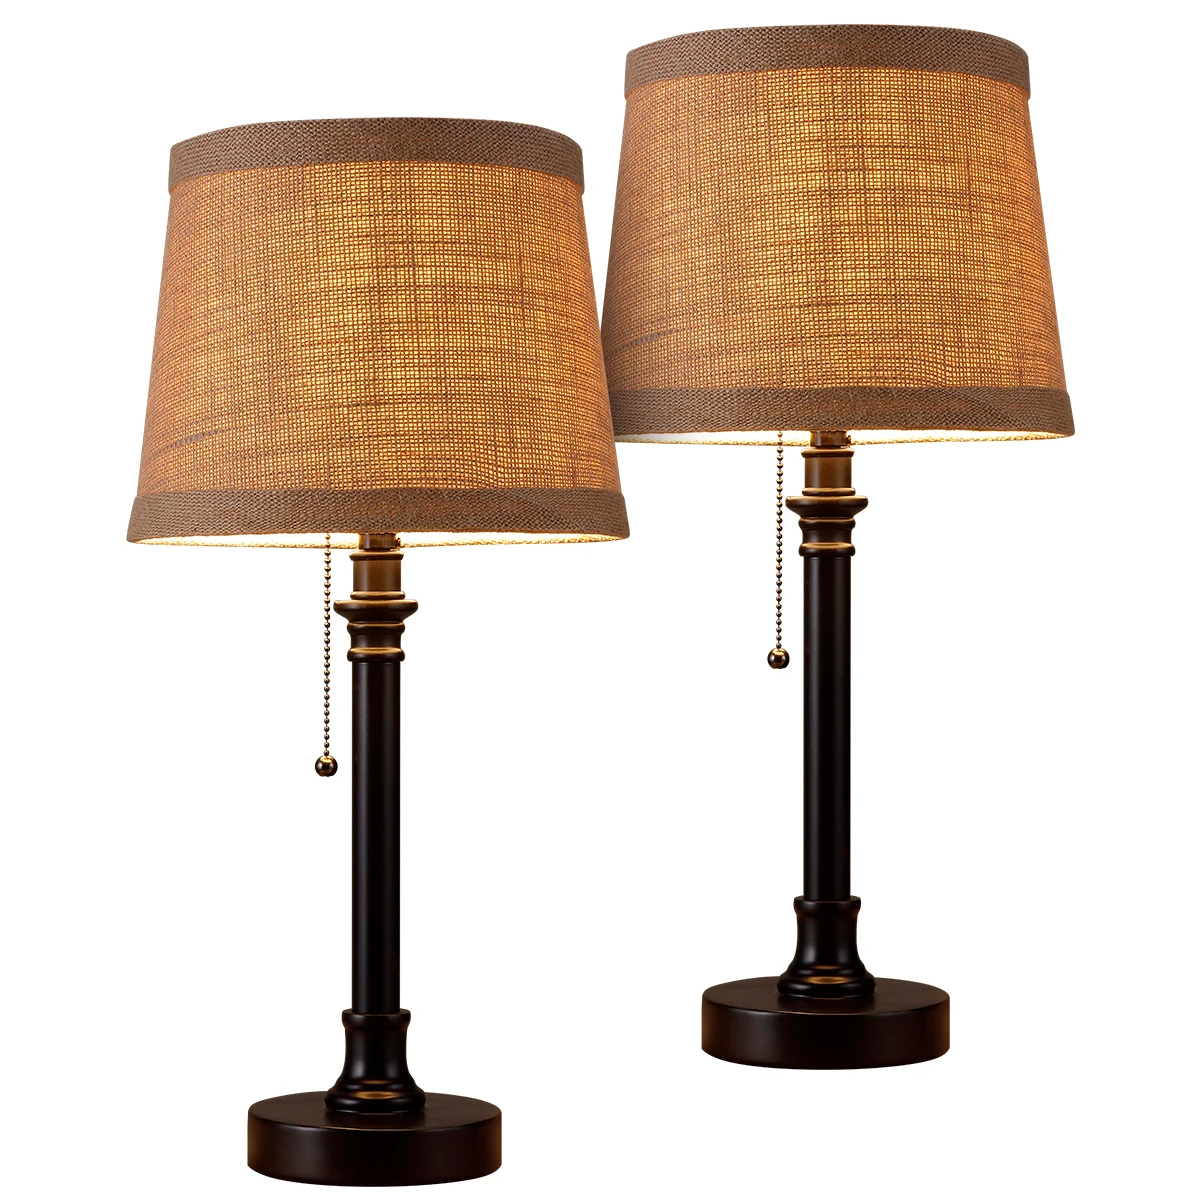 Maria Rustic Table Lamp Set Of 2 Bedside Desk Lamp Reading Table